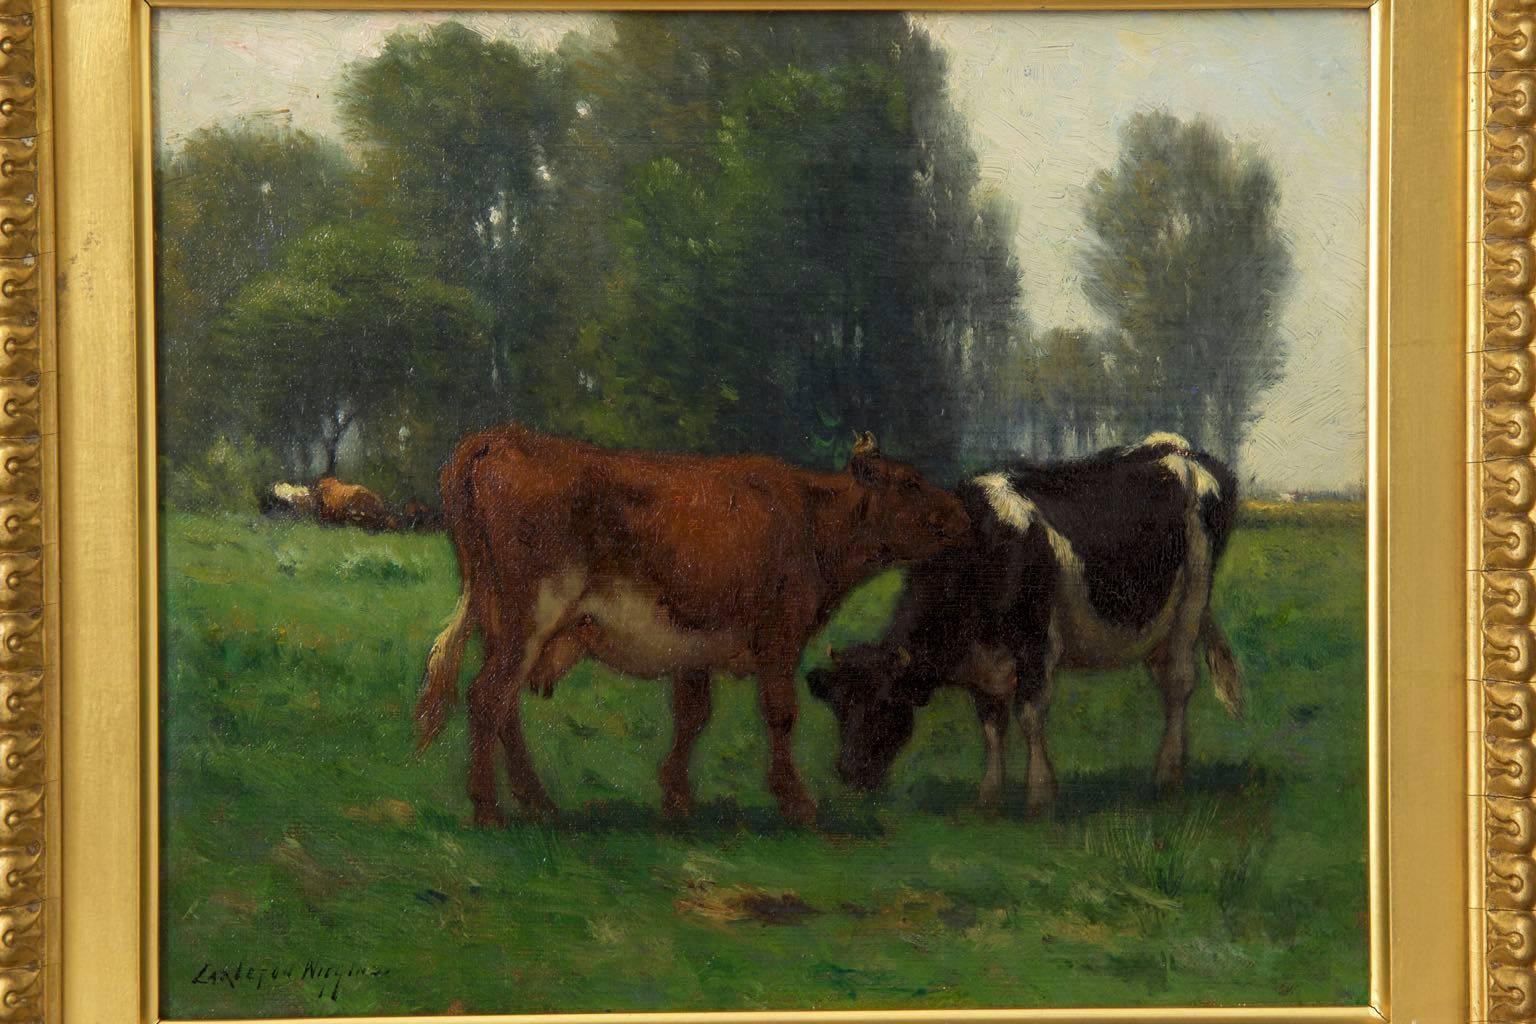 Characterized by heavy atmosphere and a certain bleary tonalism in the scene, this fine work by John Carleton Wiggins captures a pair of cows in the foreground of a vibrant green pasture. The high-chroma palette is a bit of a departure for Wiggins,